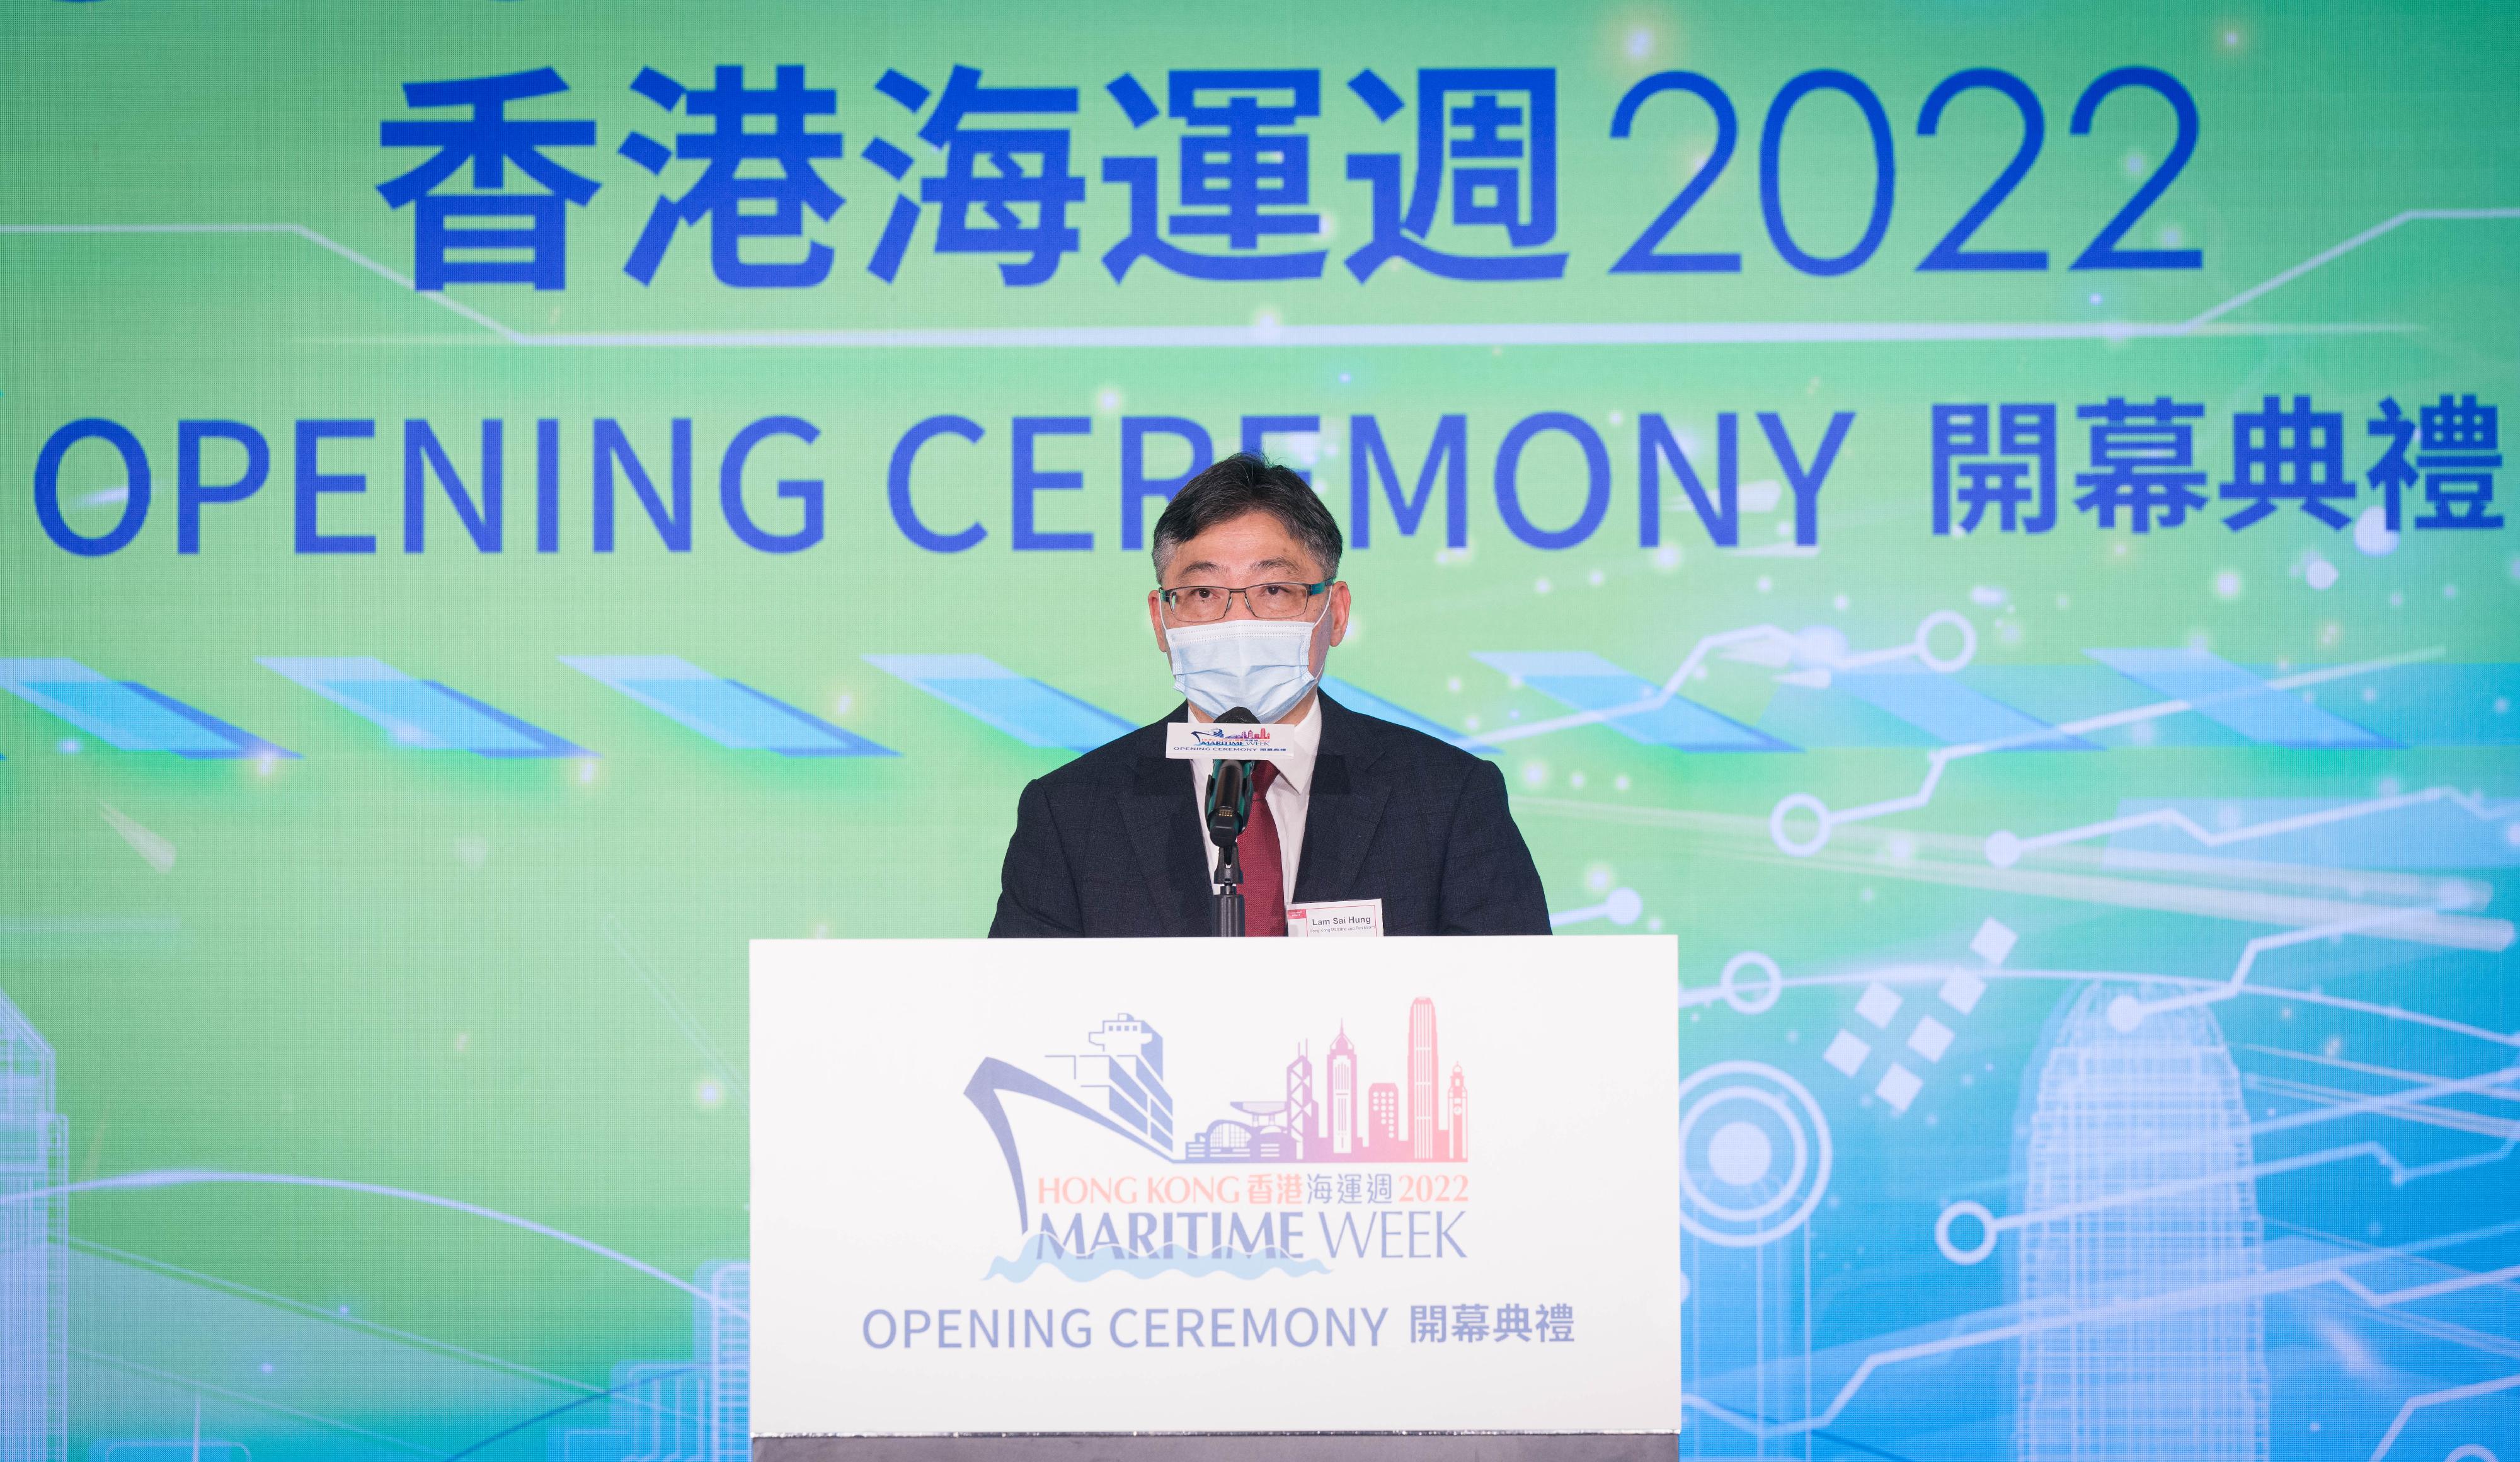 The opening ceremony of Hong Kong Maritime Week 2022, a major annual event of the maritime and port industries in Hong Kong, was held today (November 21). Photo shows the Chairman of the Hong Kong Maritime and Port Board and the Secretary for Transport and Logistics, Mr Lam Sai-hung, giving a speech at the ceremony.